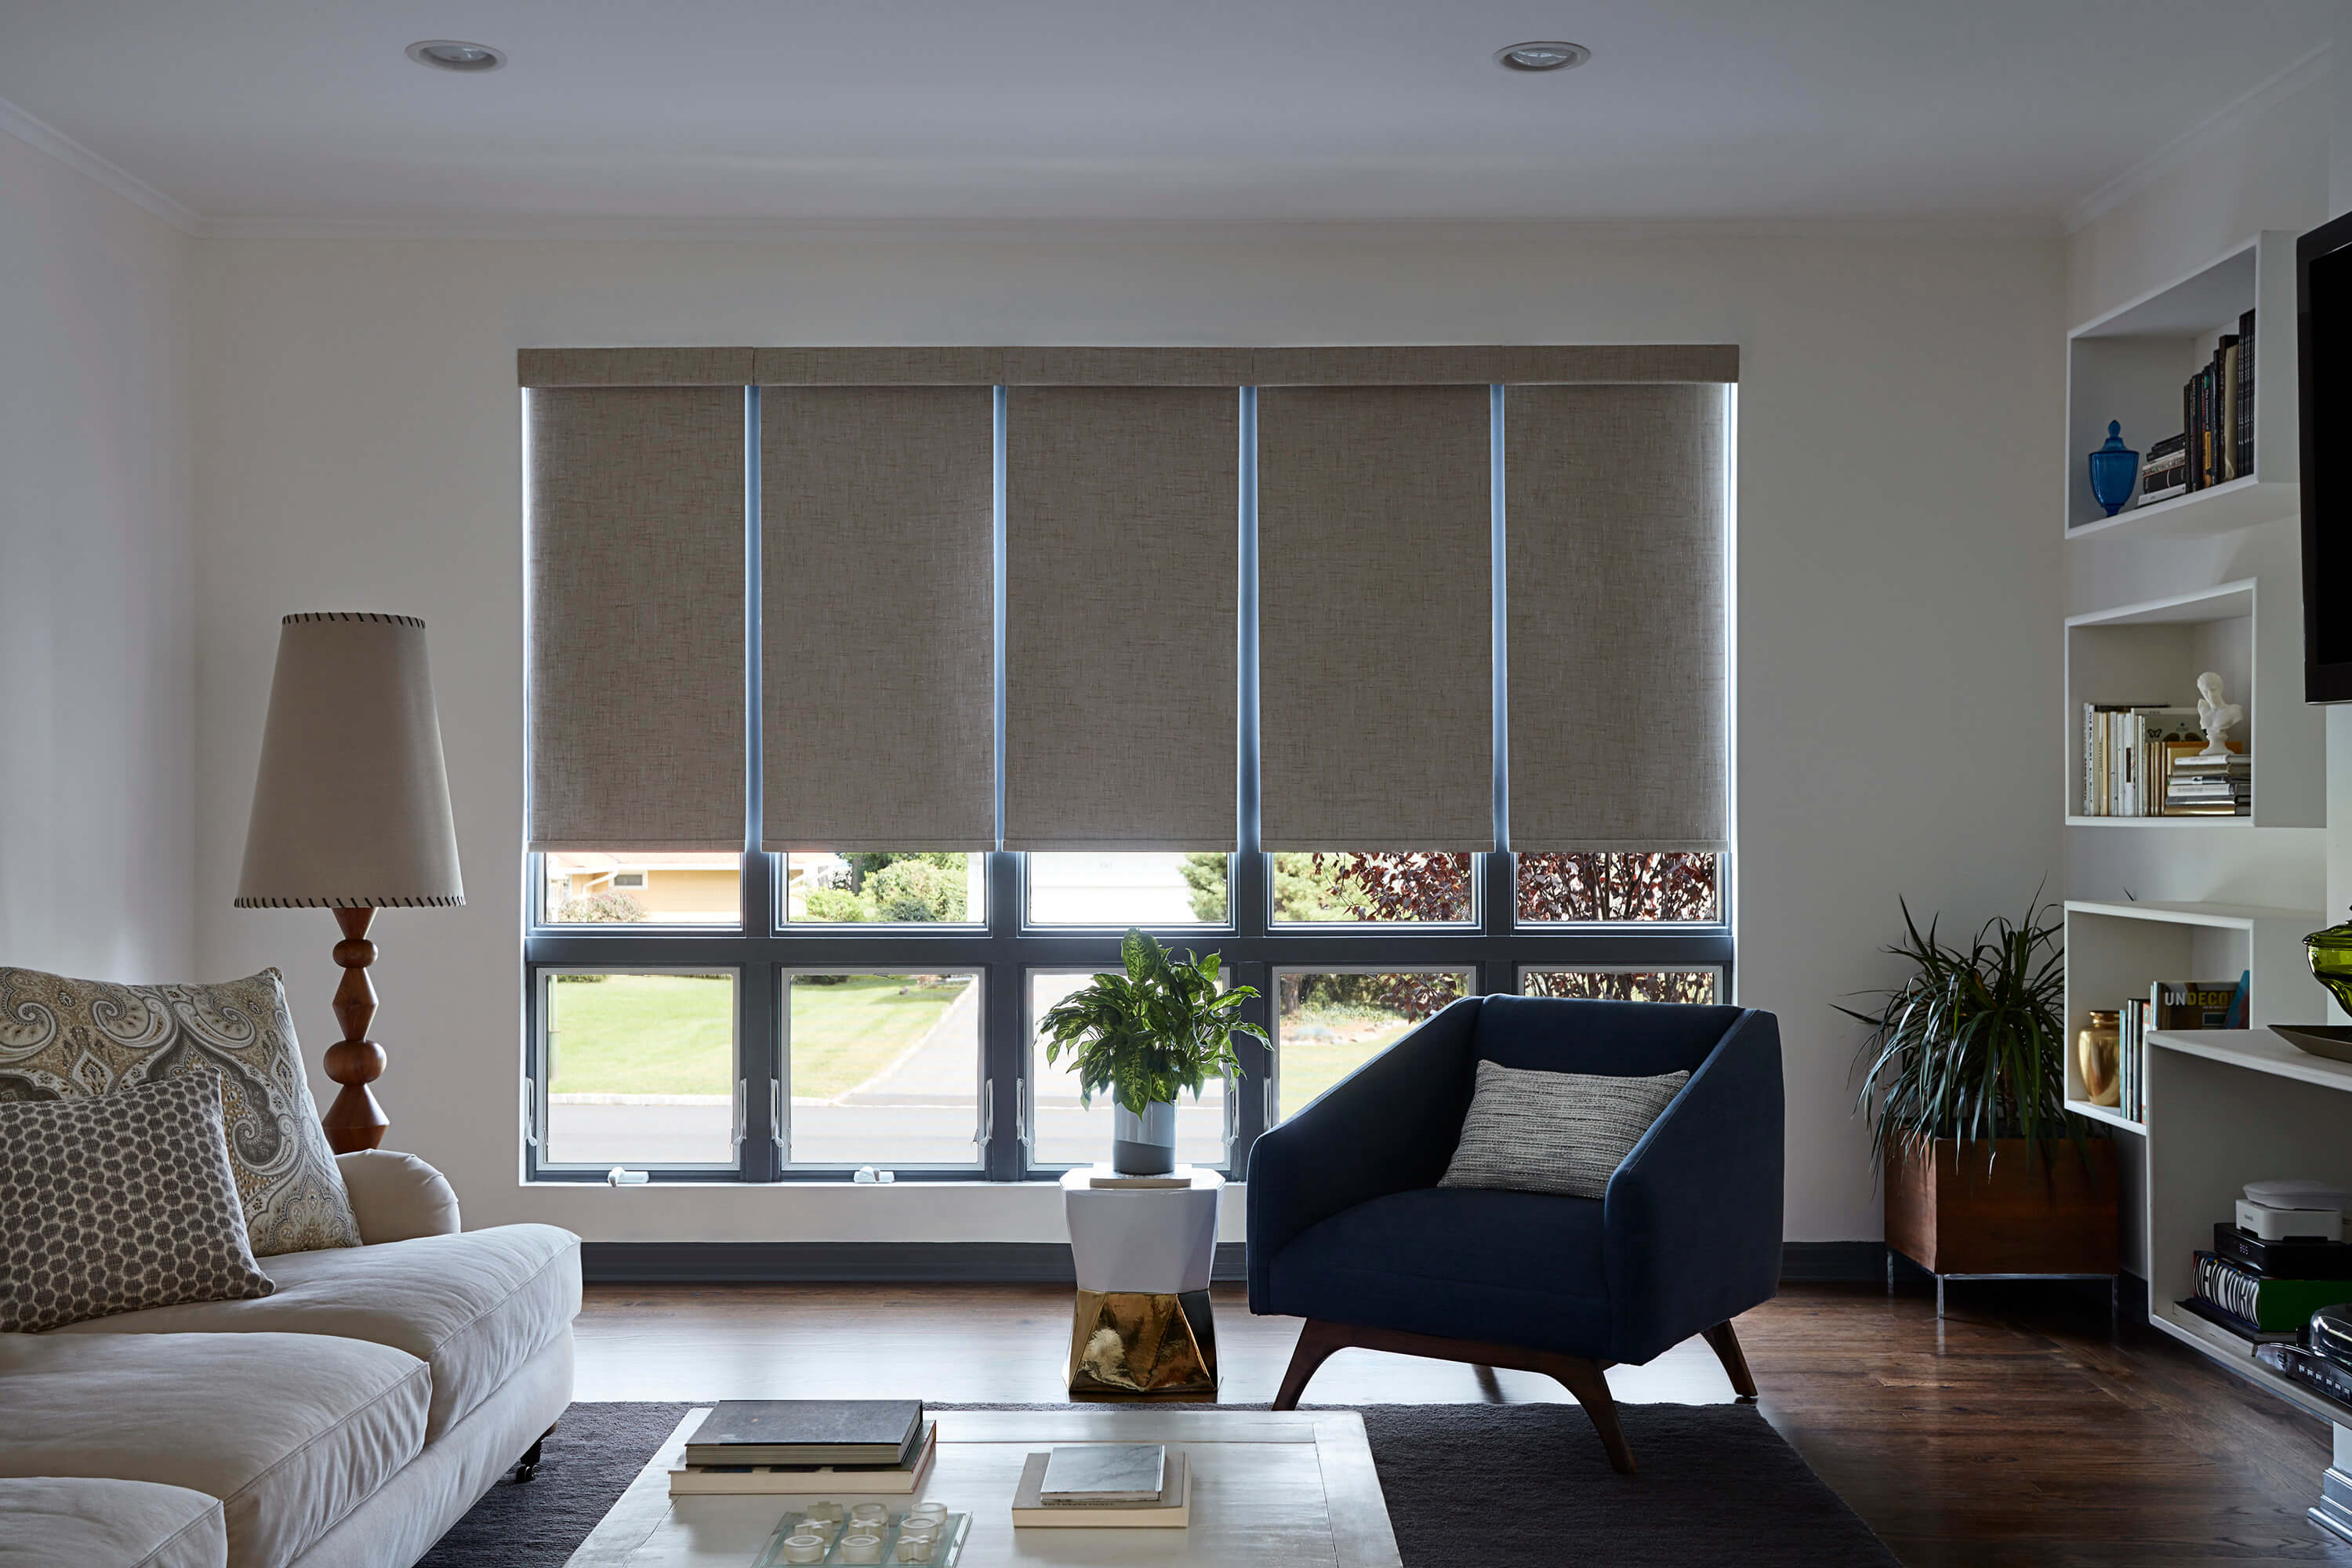 Five motorized tan blackout roller shades on side-by-side windows are synched in height in a modern living room.